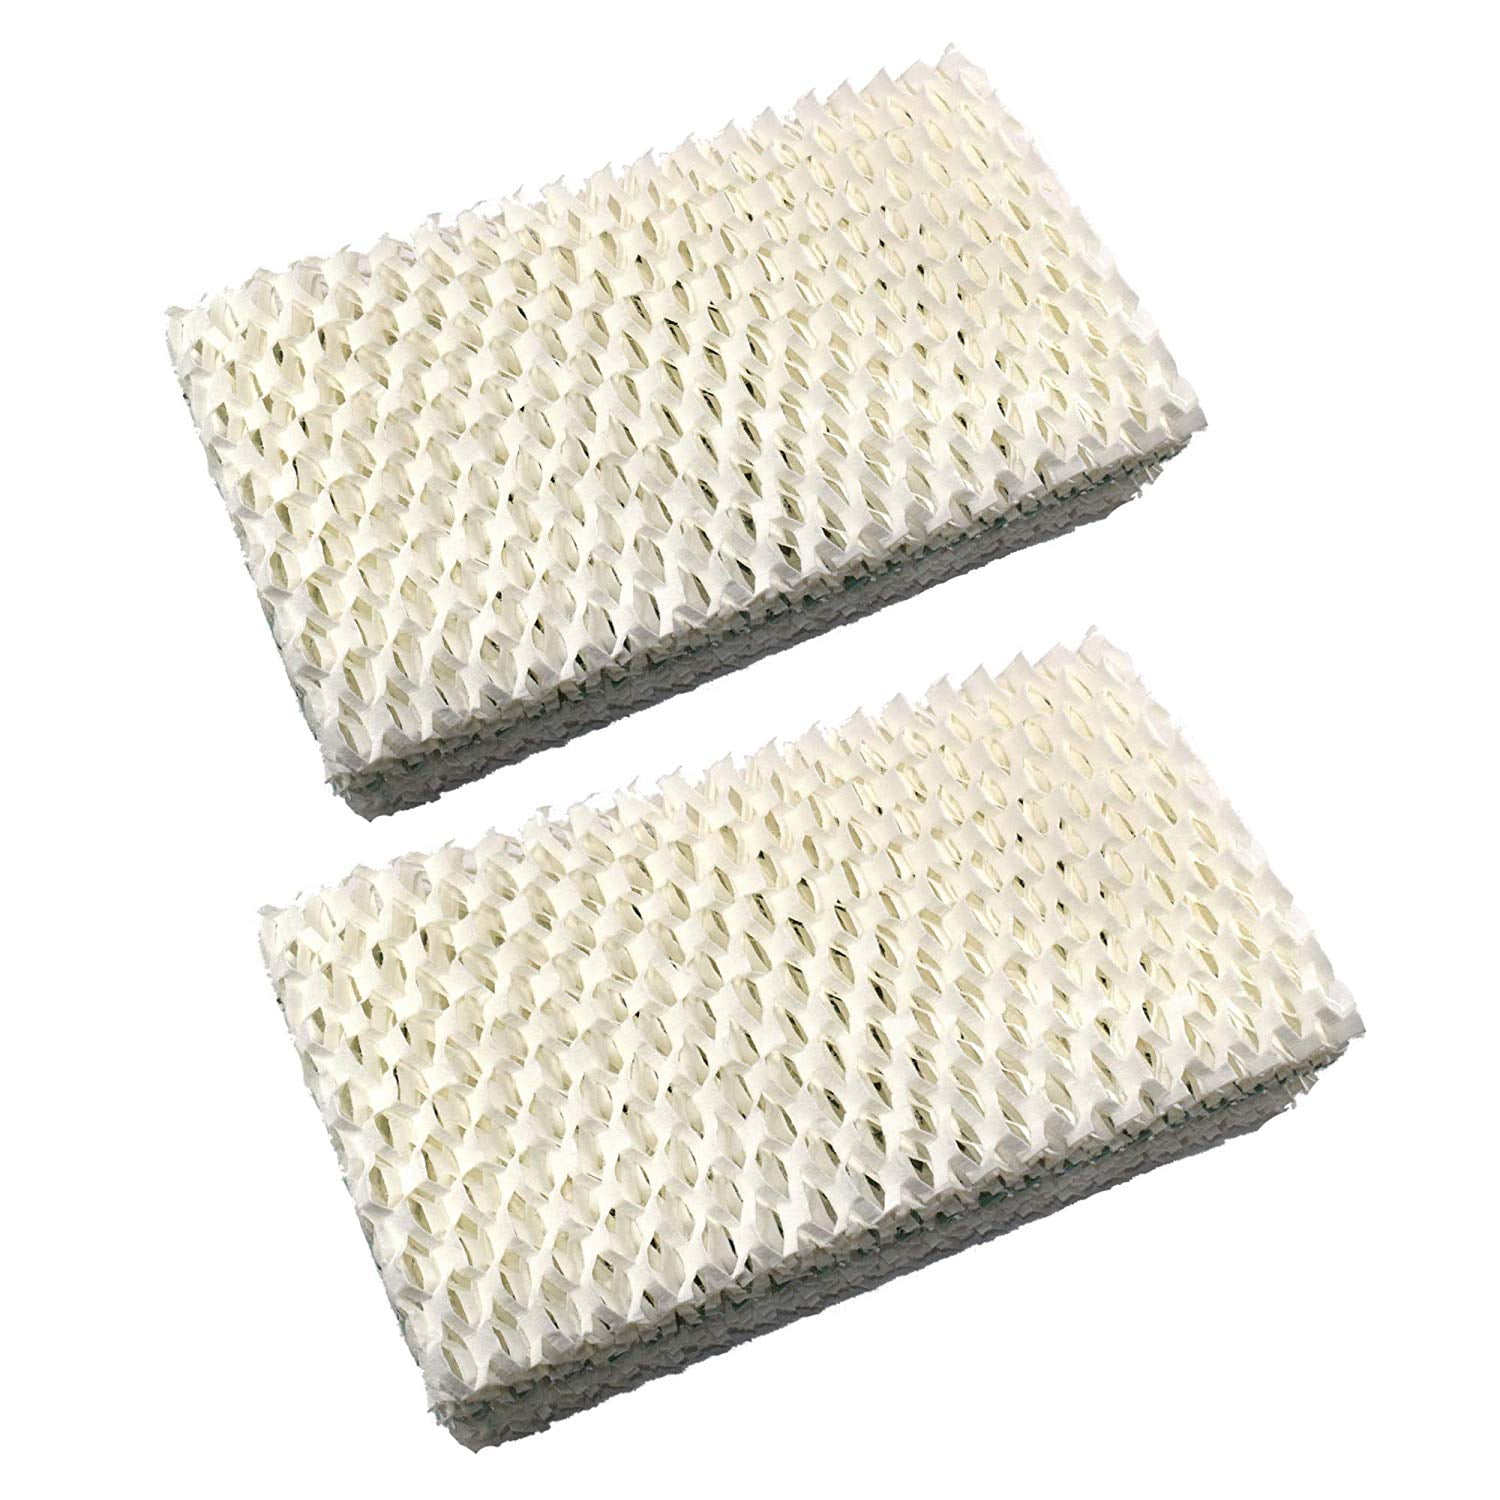 2x HQRP Wick Filters fits Emerson MoistAir Console Humidifiers HDC-1 Replacement 